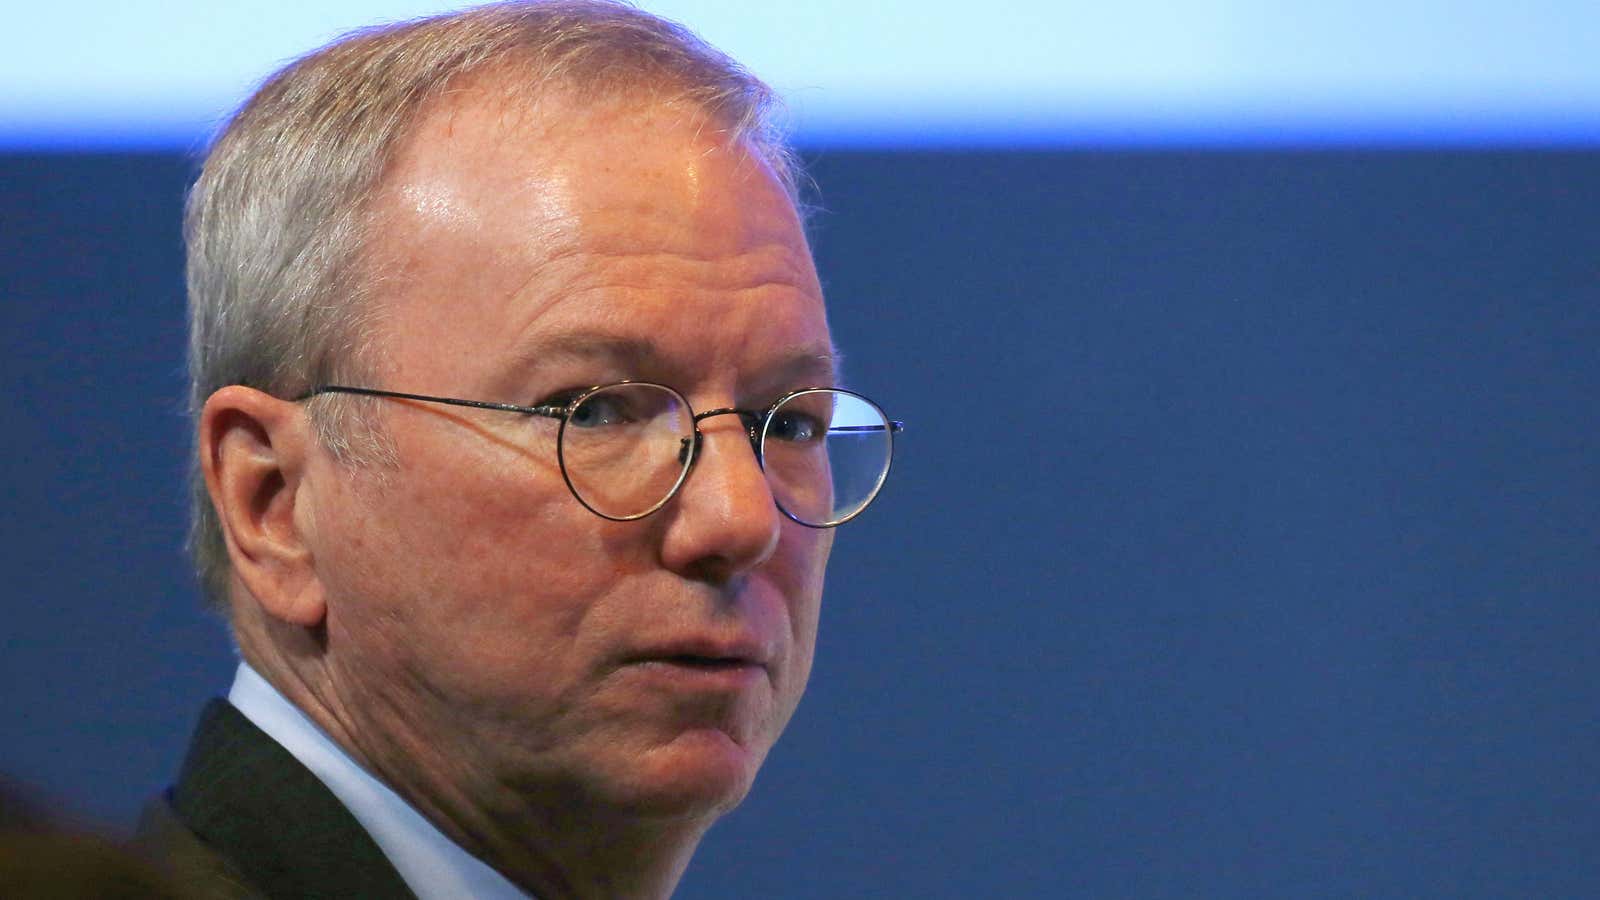 Eric Schmidt, former CEO of Google attends the World Economic Forum (WEF) annual meeting in Davos, Switzerland January 19, 2017. REUTERS/Ruben Sprich – RTSW9JV